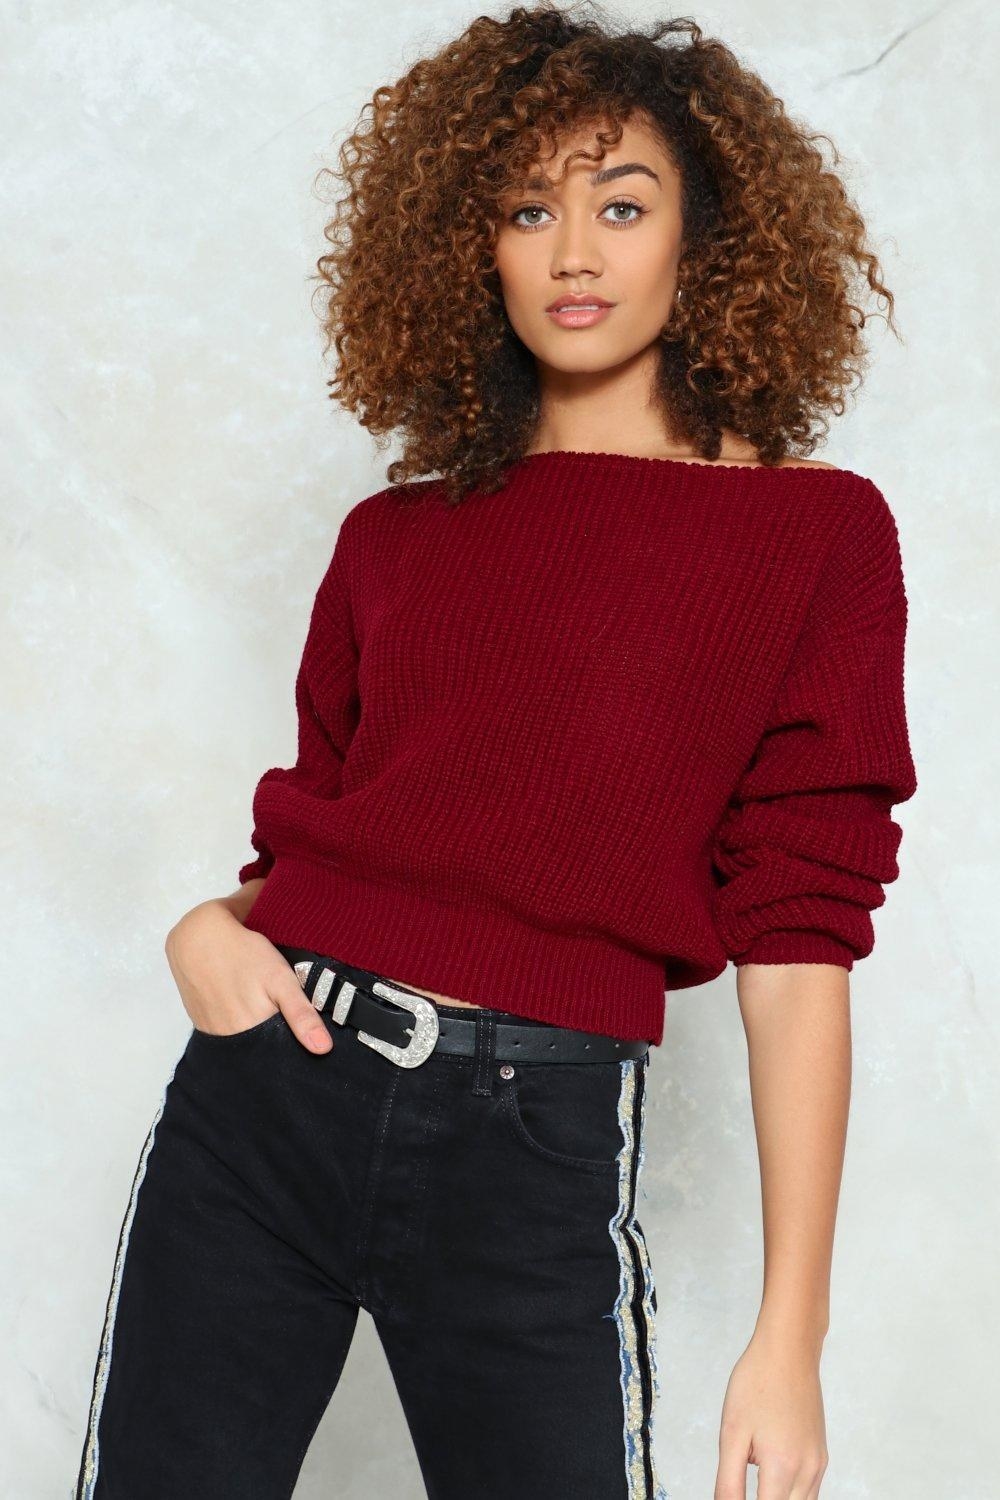 Shop Nasty Gal's Huge Up To 70% Off Sale And Start 2018 In Style